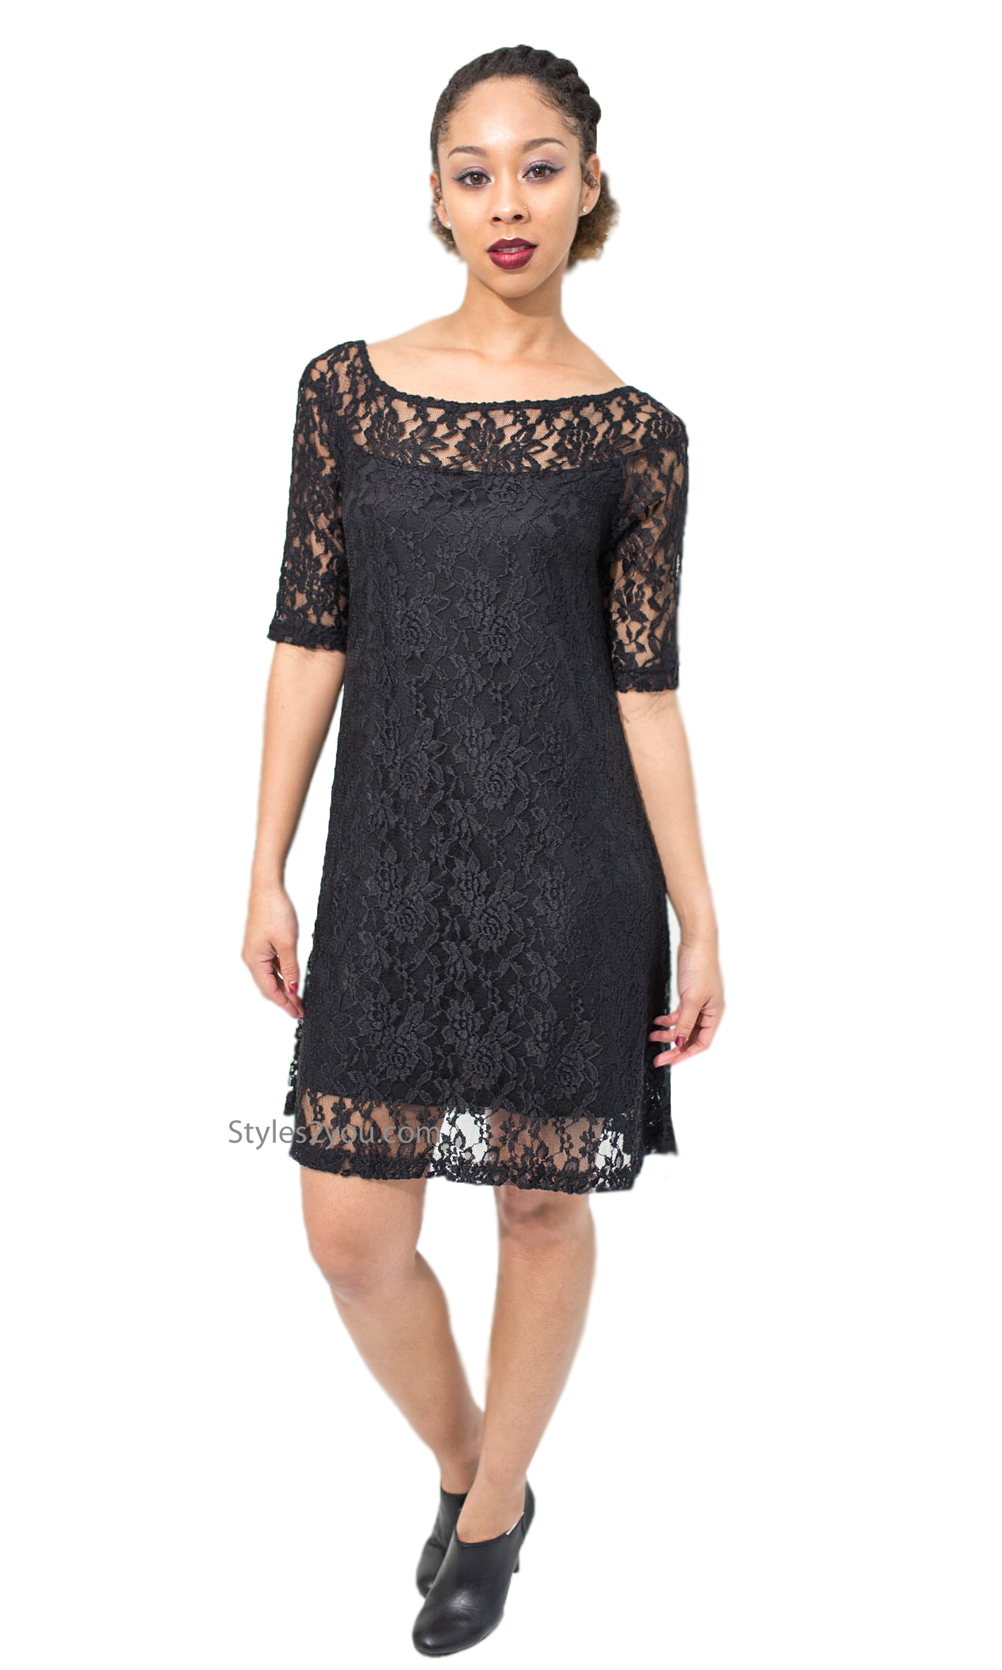 adrian-half-sleeve-lined-all-lace-evening-dress-in-black-verducci-clothing-ladies-lace-shirt